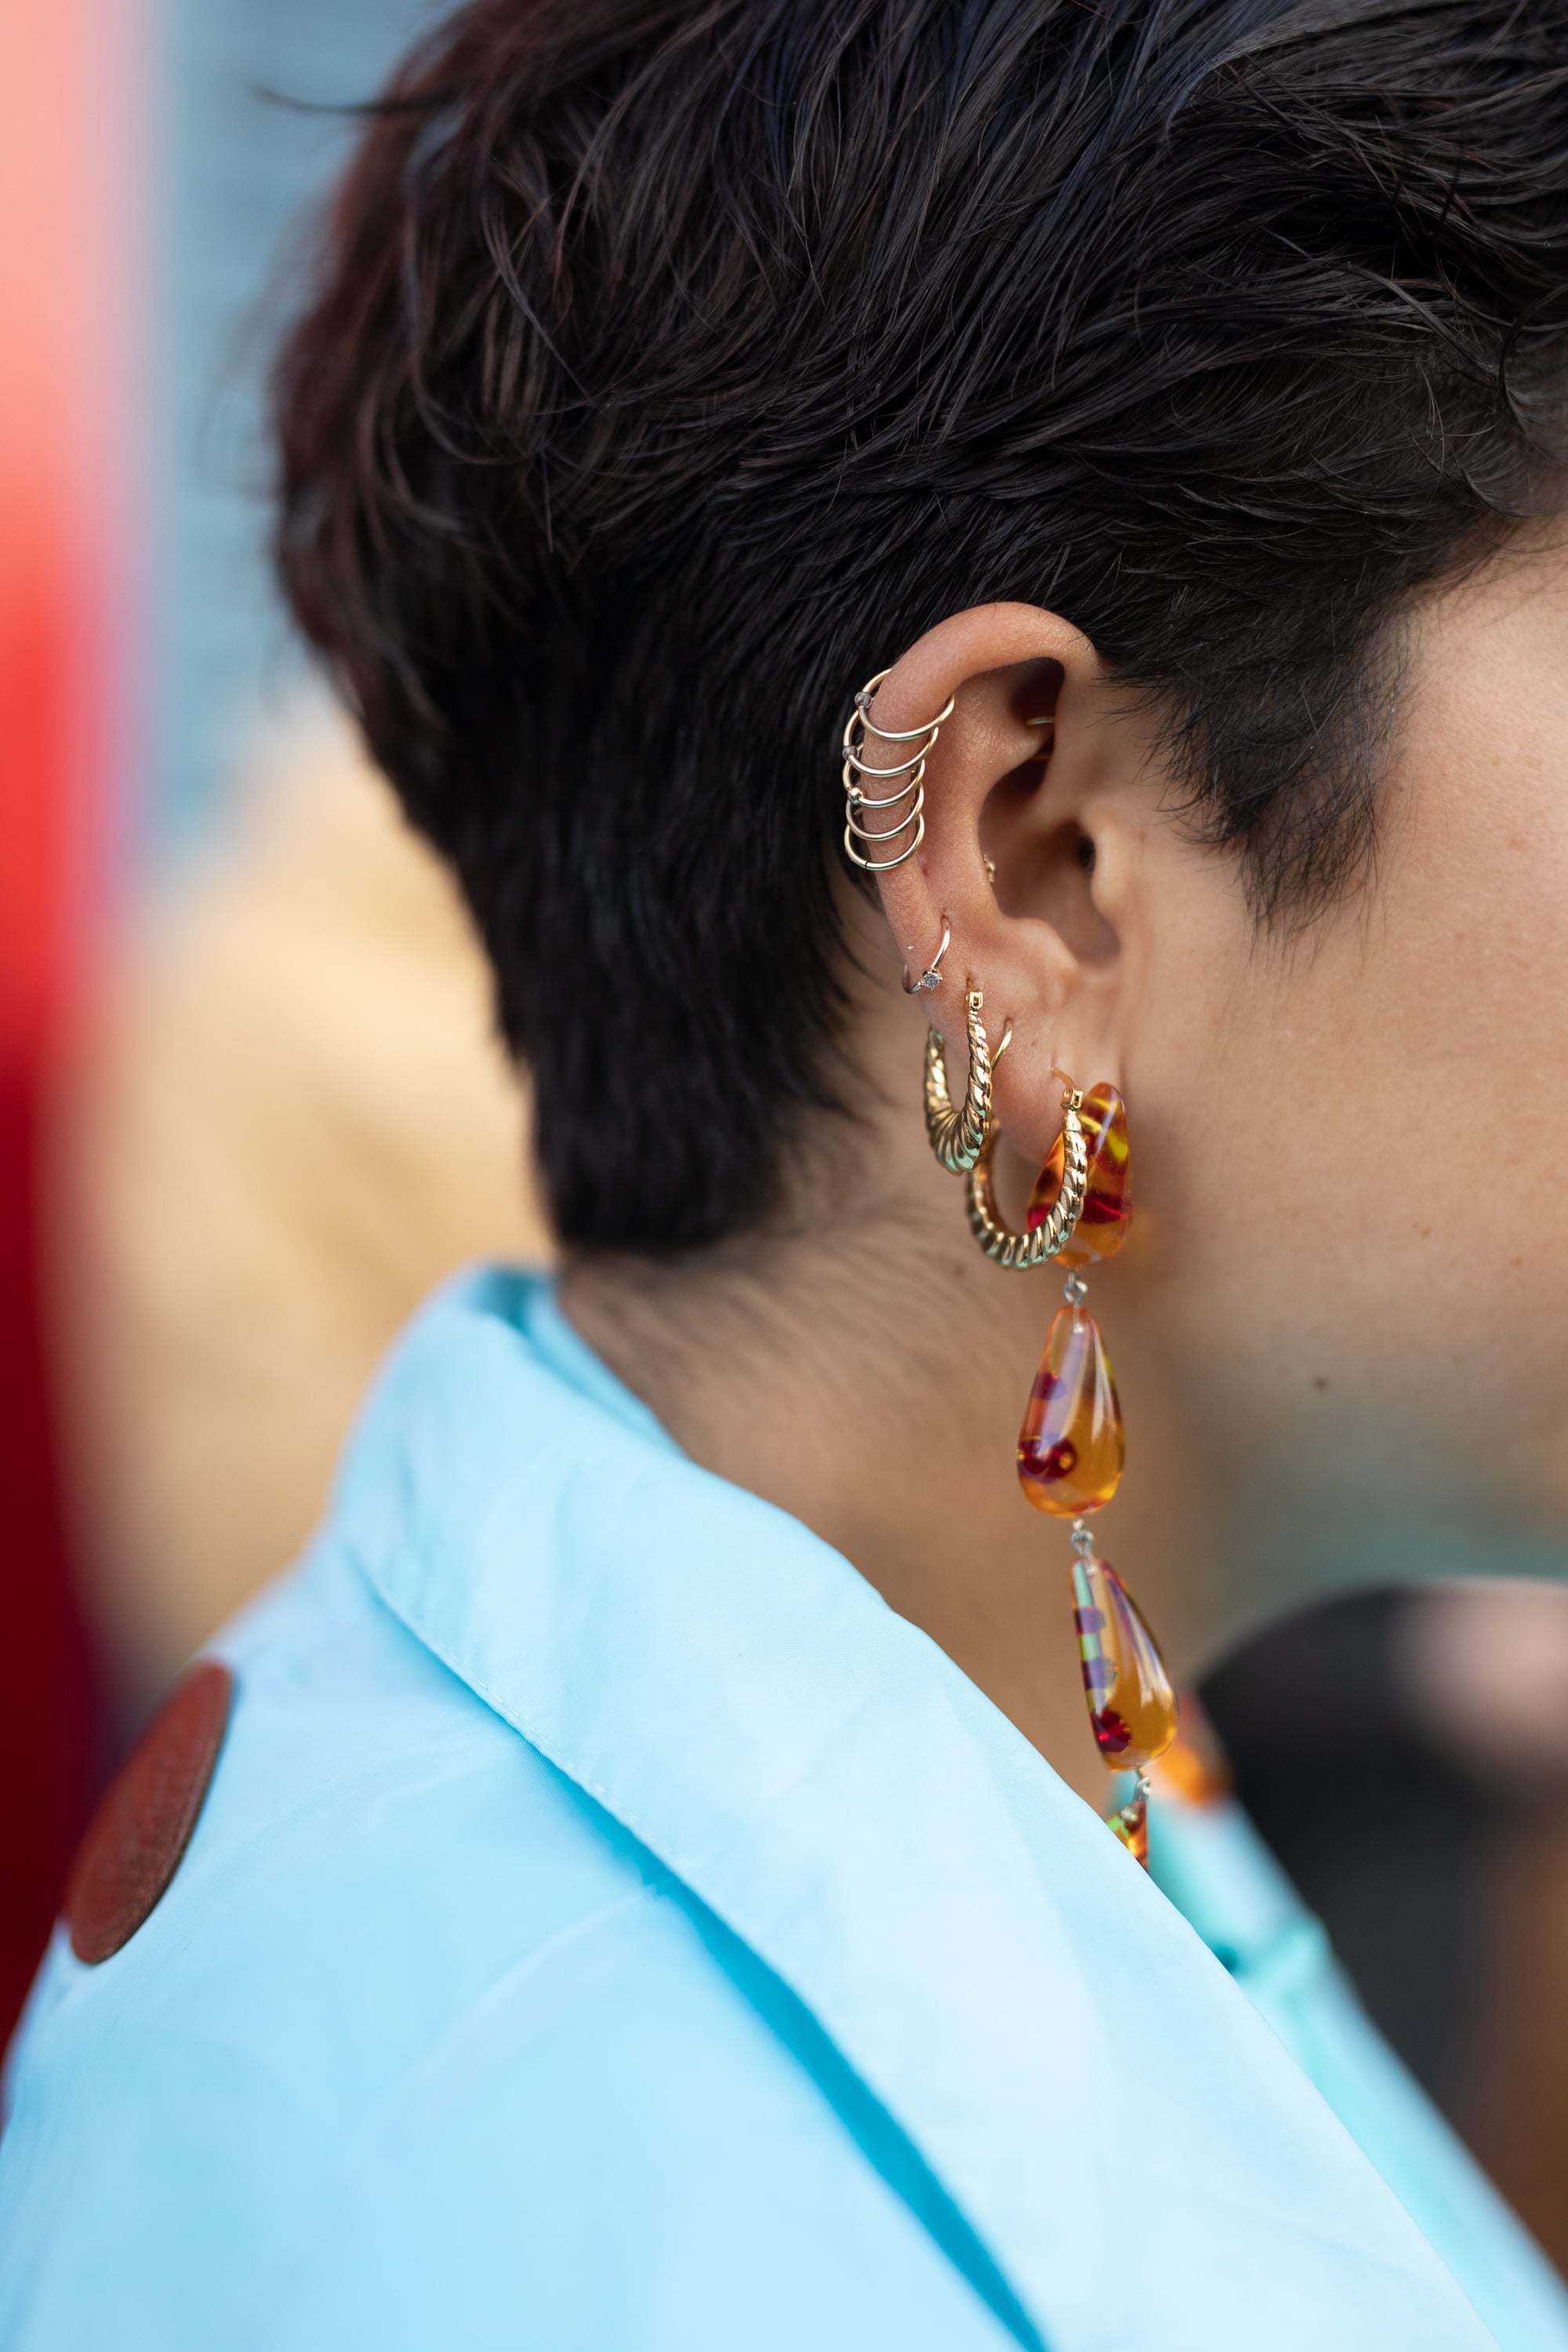 NEW YORK, NEW YORK - FEBRUARY 04: A guest is seen on the street during Men's New York Fashion Week wearing various earrings on February 04, 2019 in New York City. (Photo by Matthew Sperzel/Getty Images)